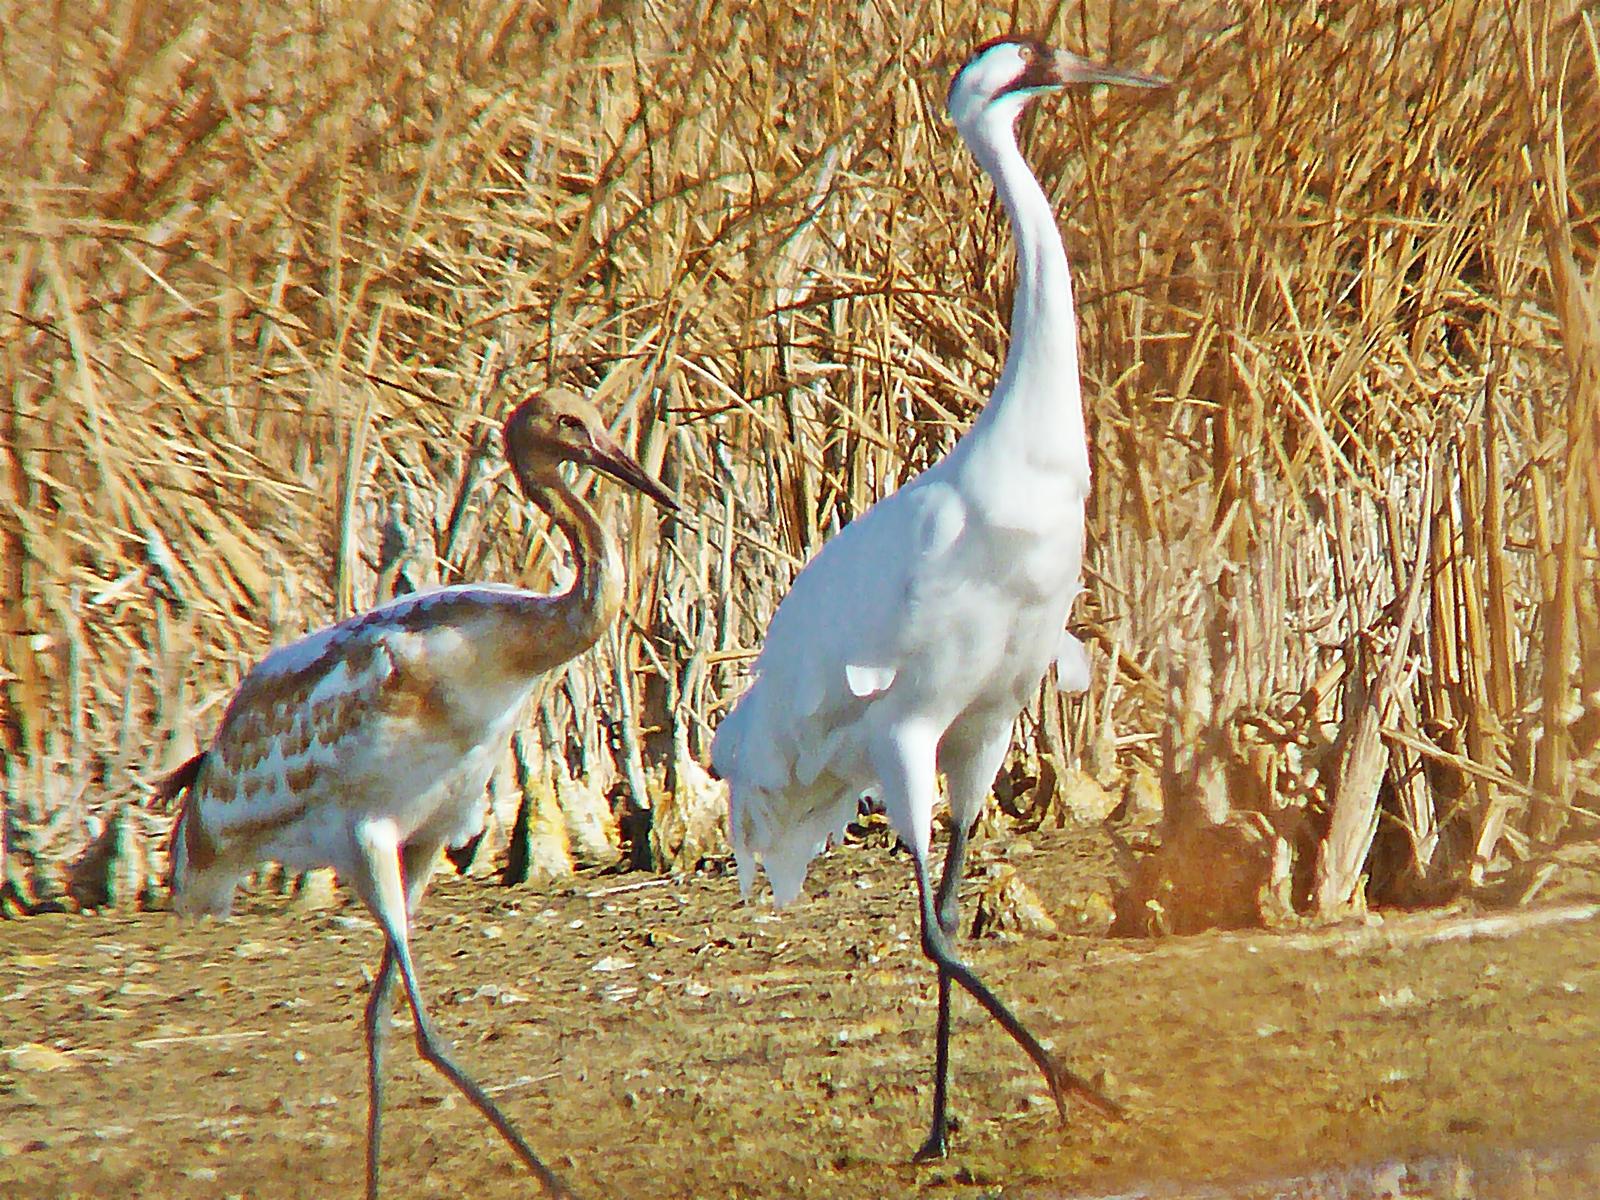 Whooping Crane Photo by Bob Neugebauer